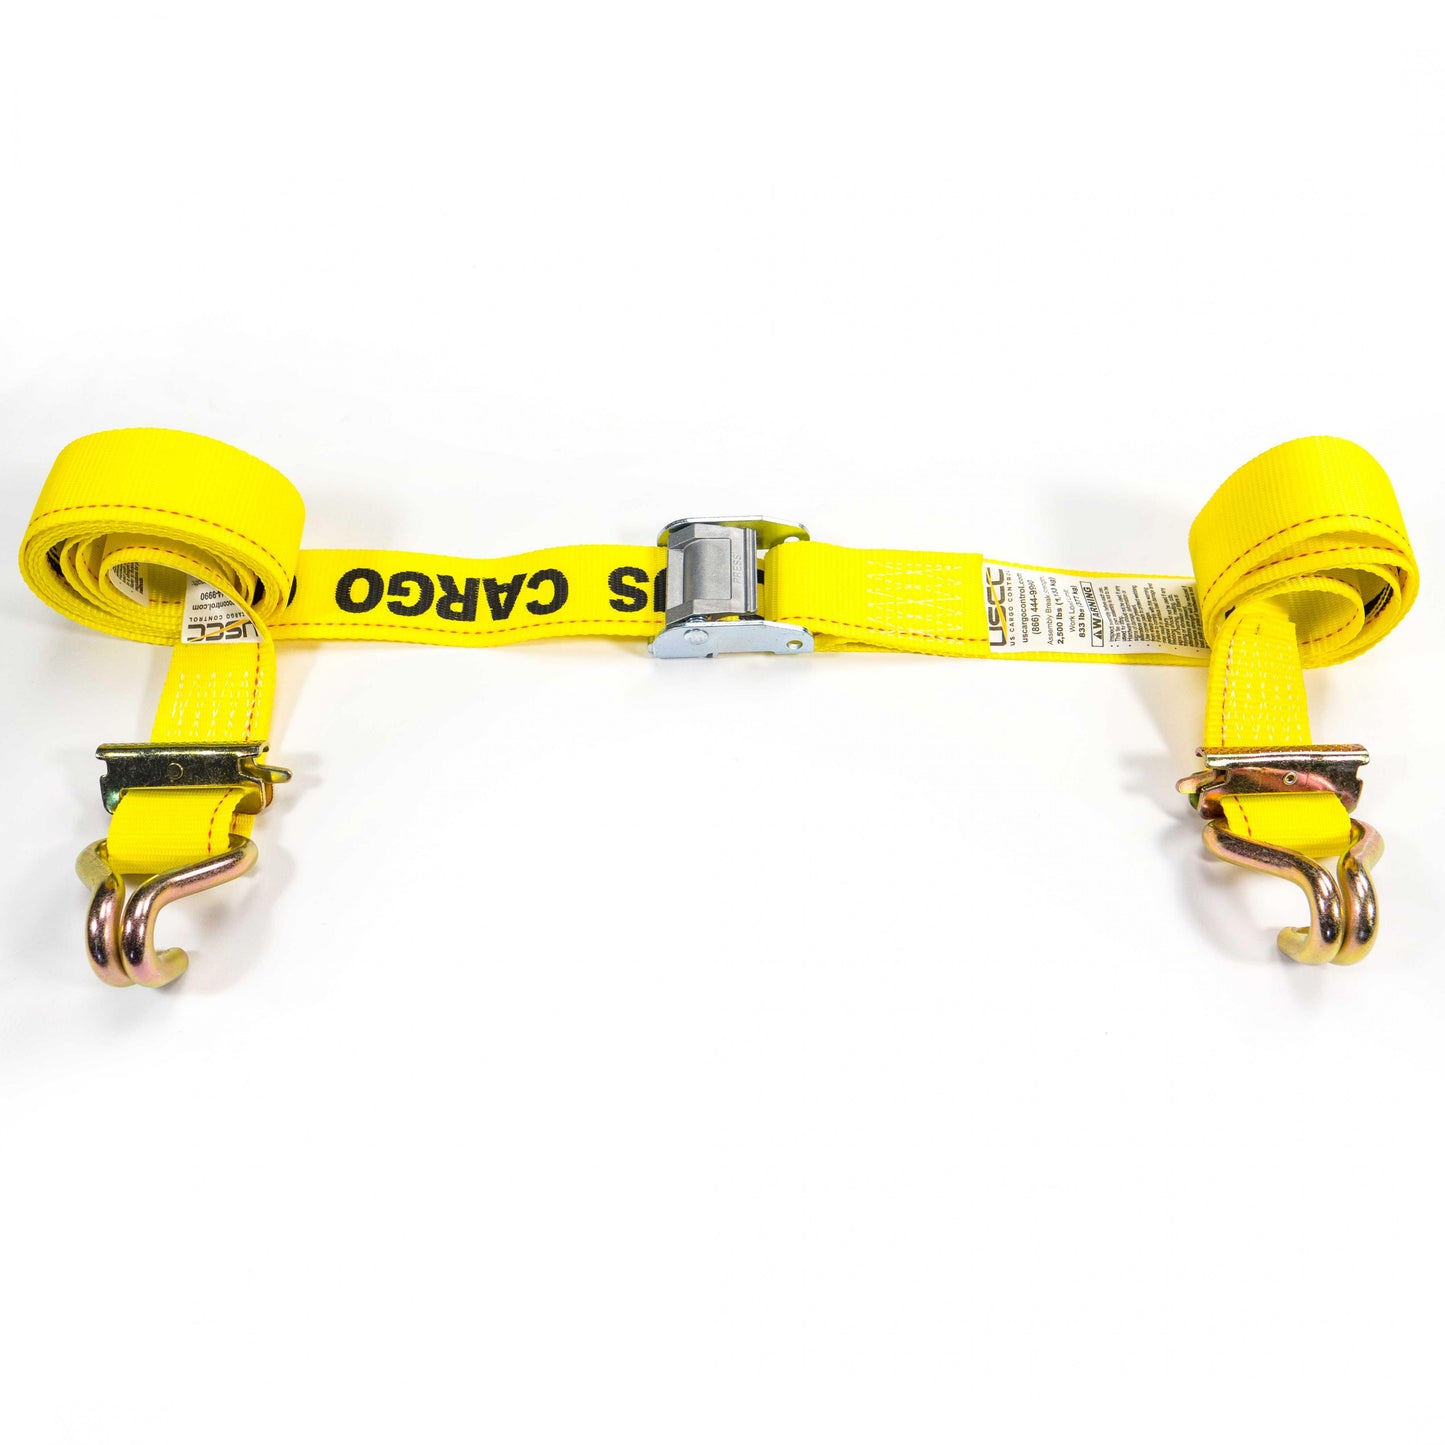 2 foot foot X 12 foot Yellow ETrack Cam Strap wSpring EFittings and Wire Hooks image 2 of 10